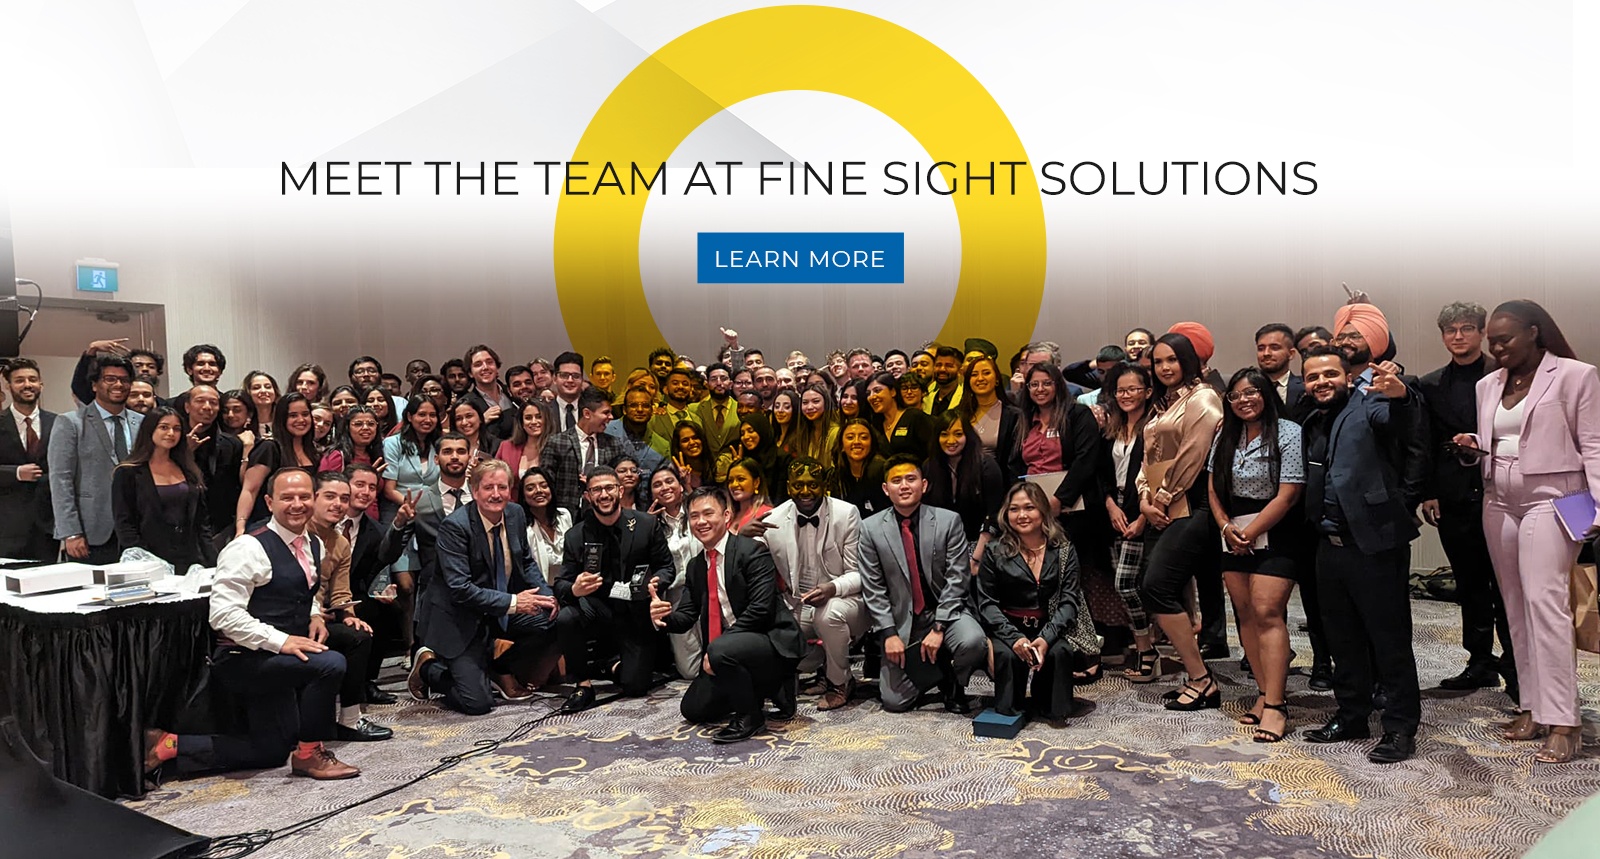 MEET THE TEAM AT FINE SIGHT SOLUTIONS